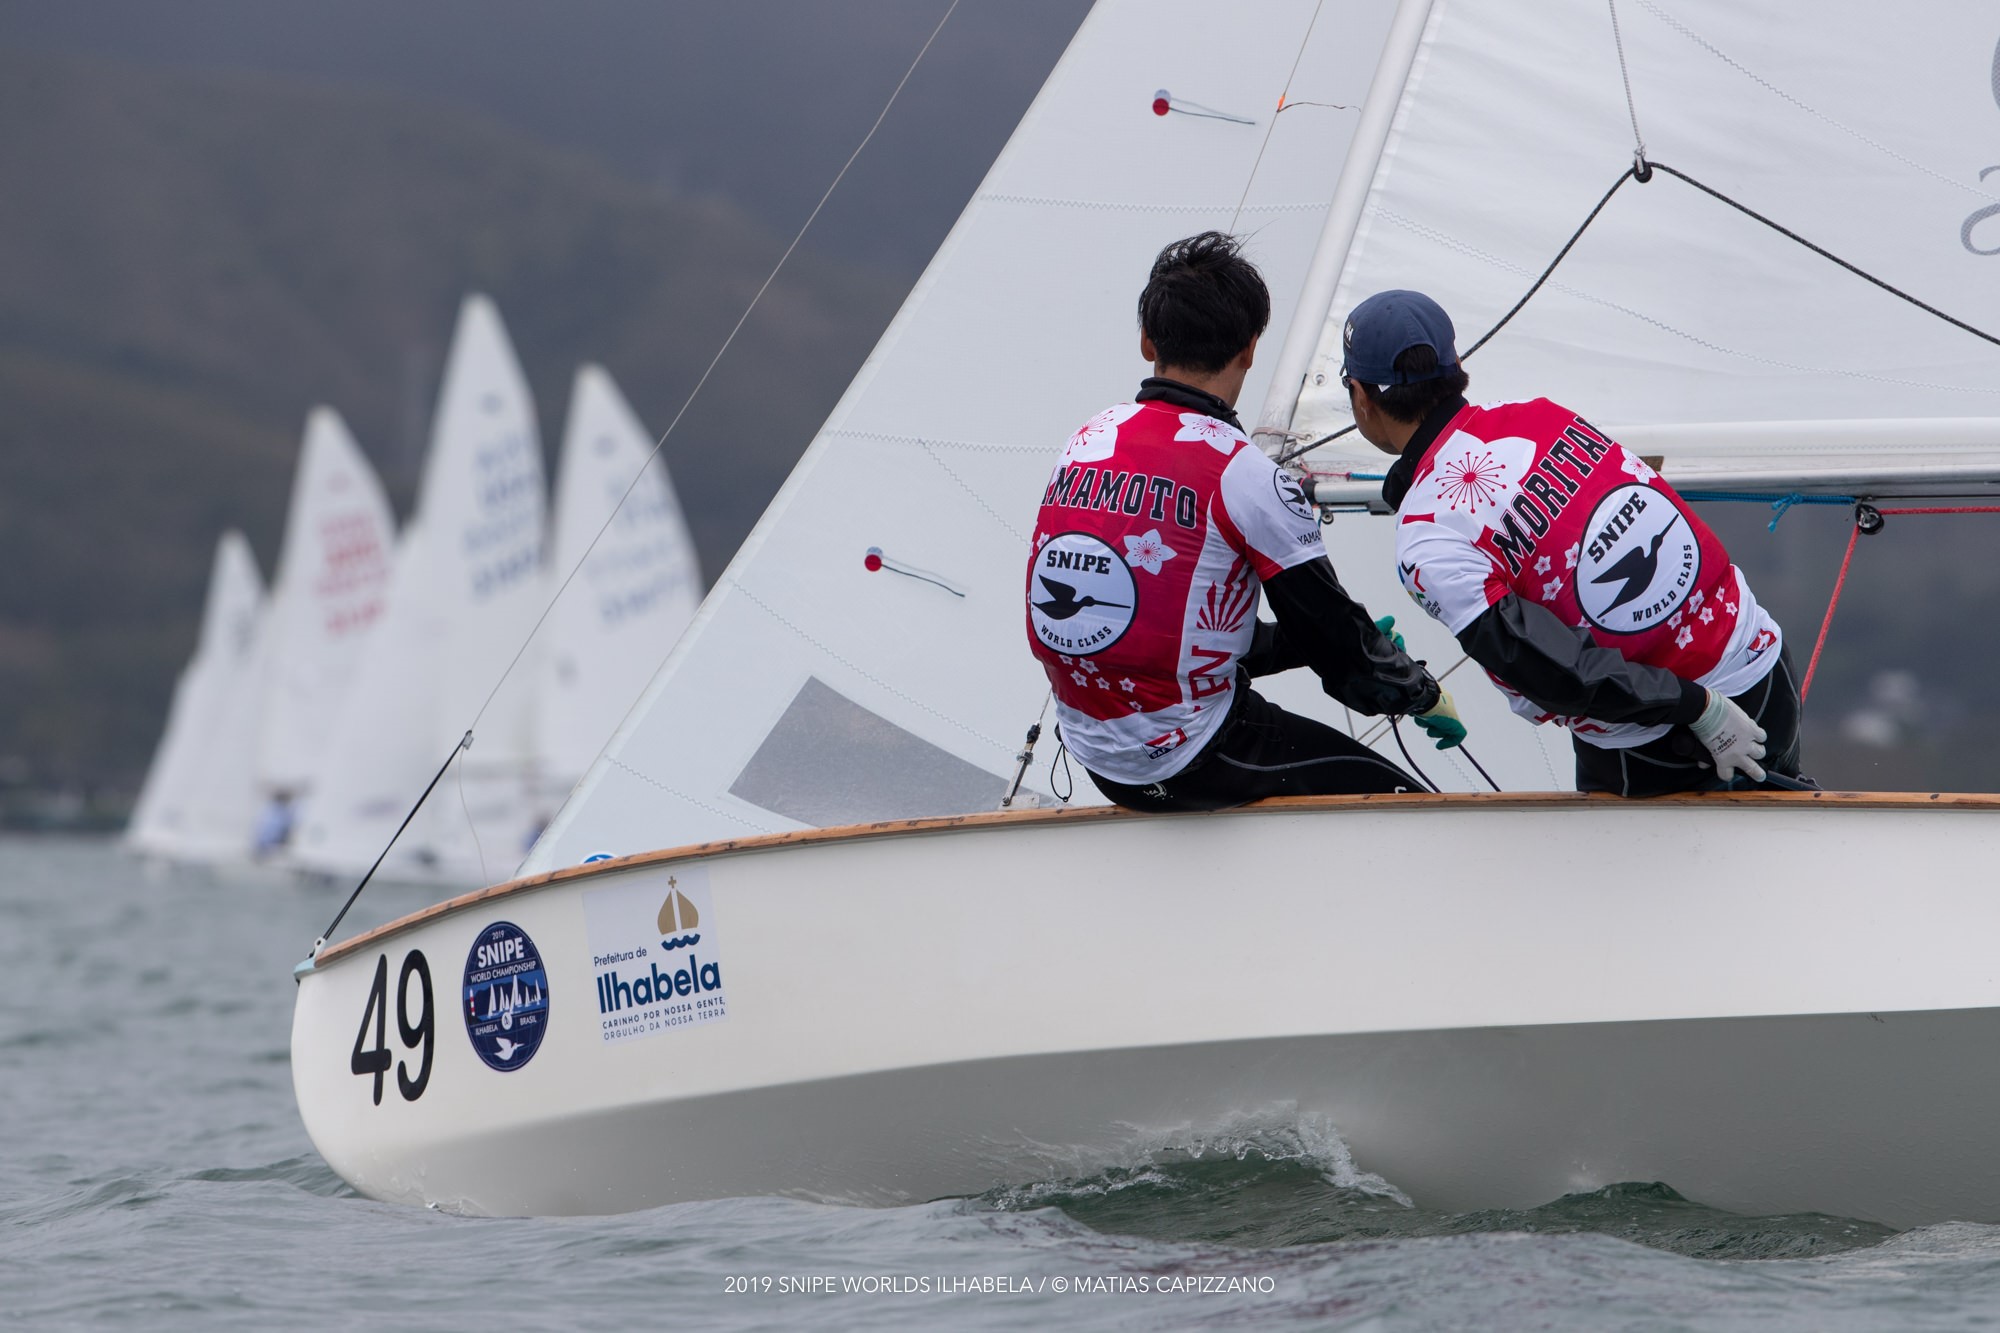  Snipe  2019 Snipe World Championship  Ilhabela, Brazil  Day 1, one race in light winds and drizzle